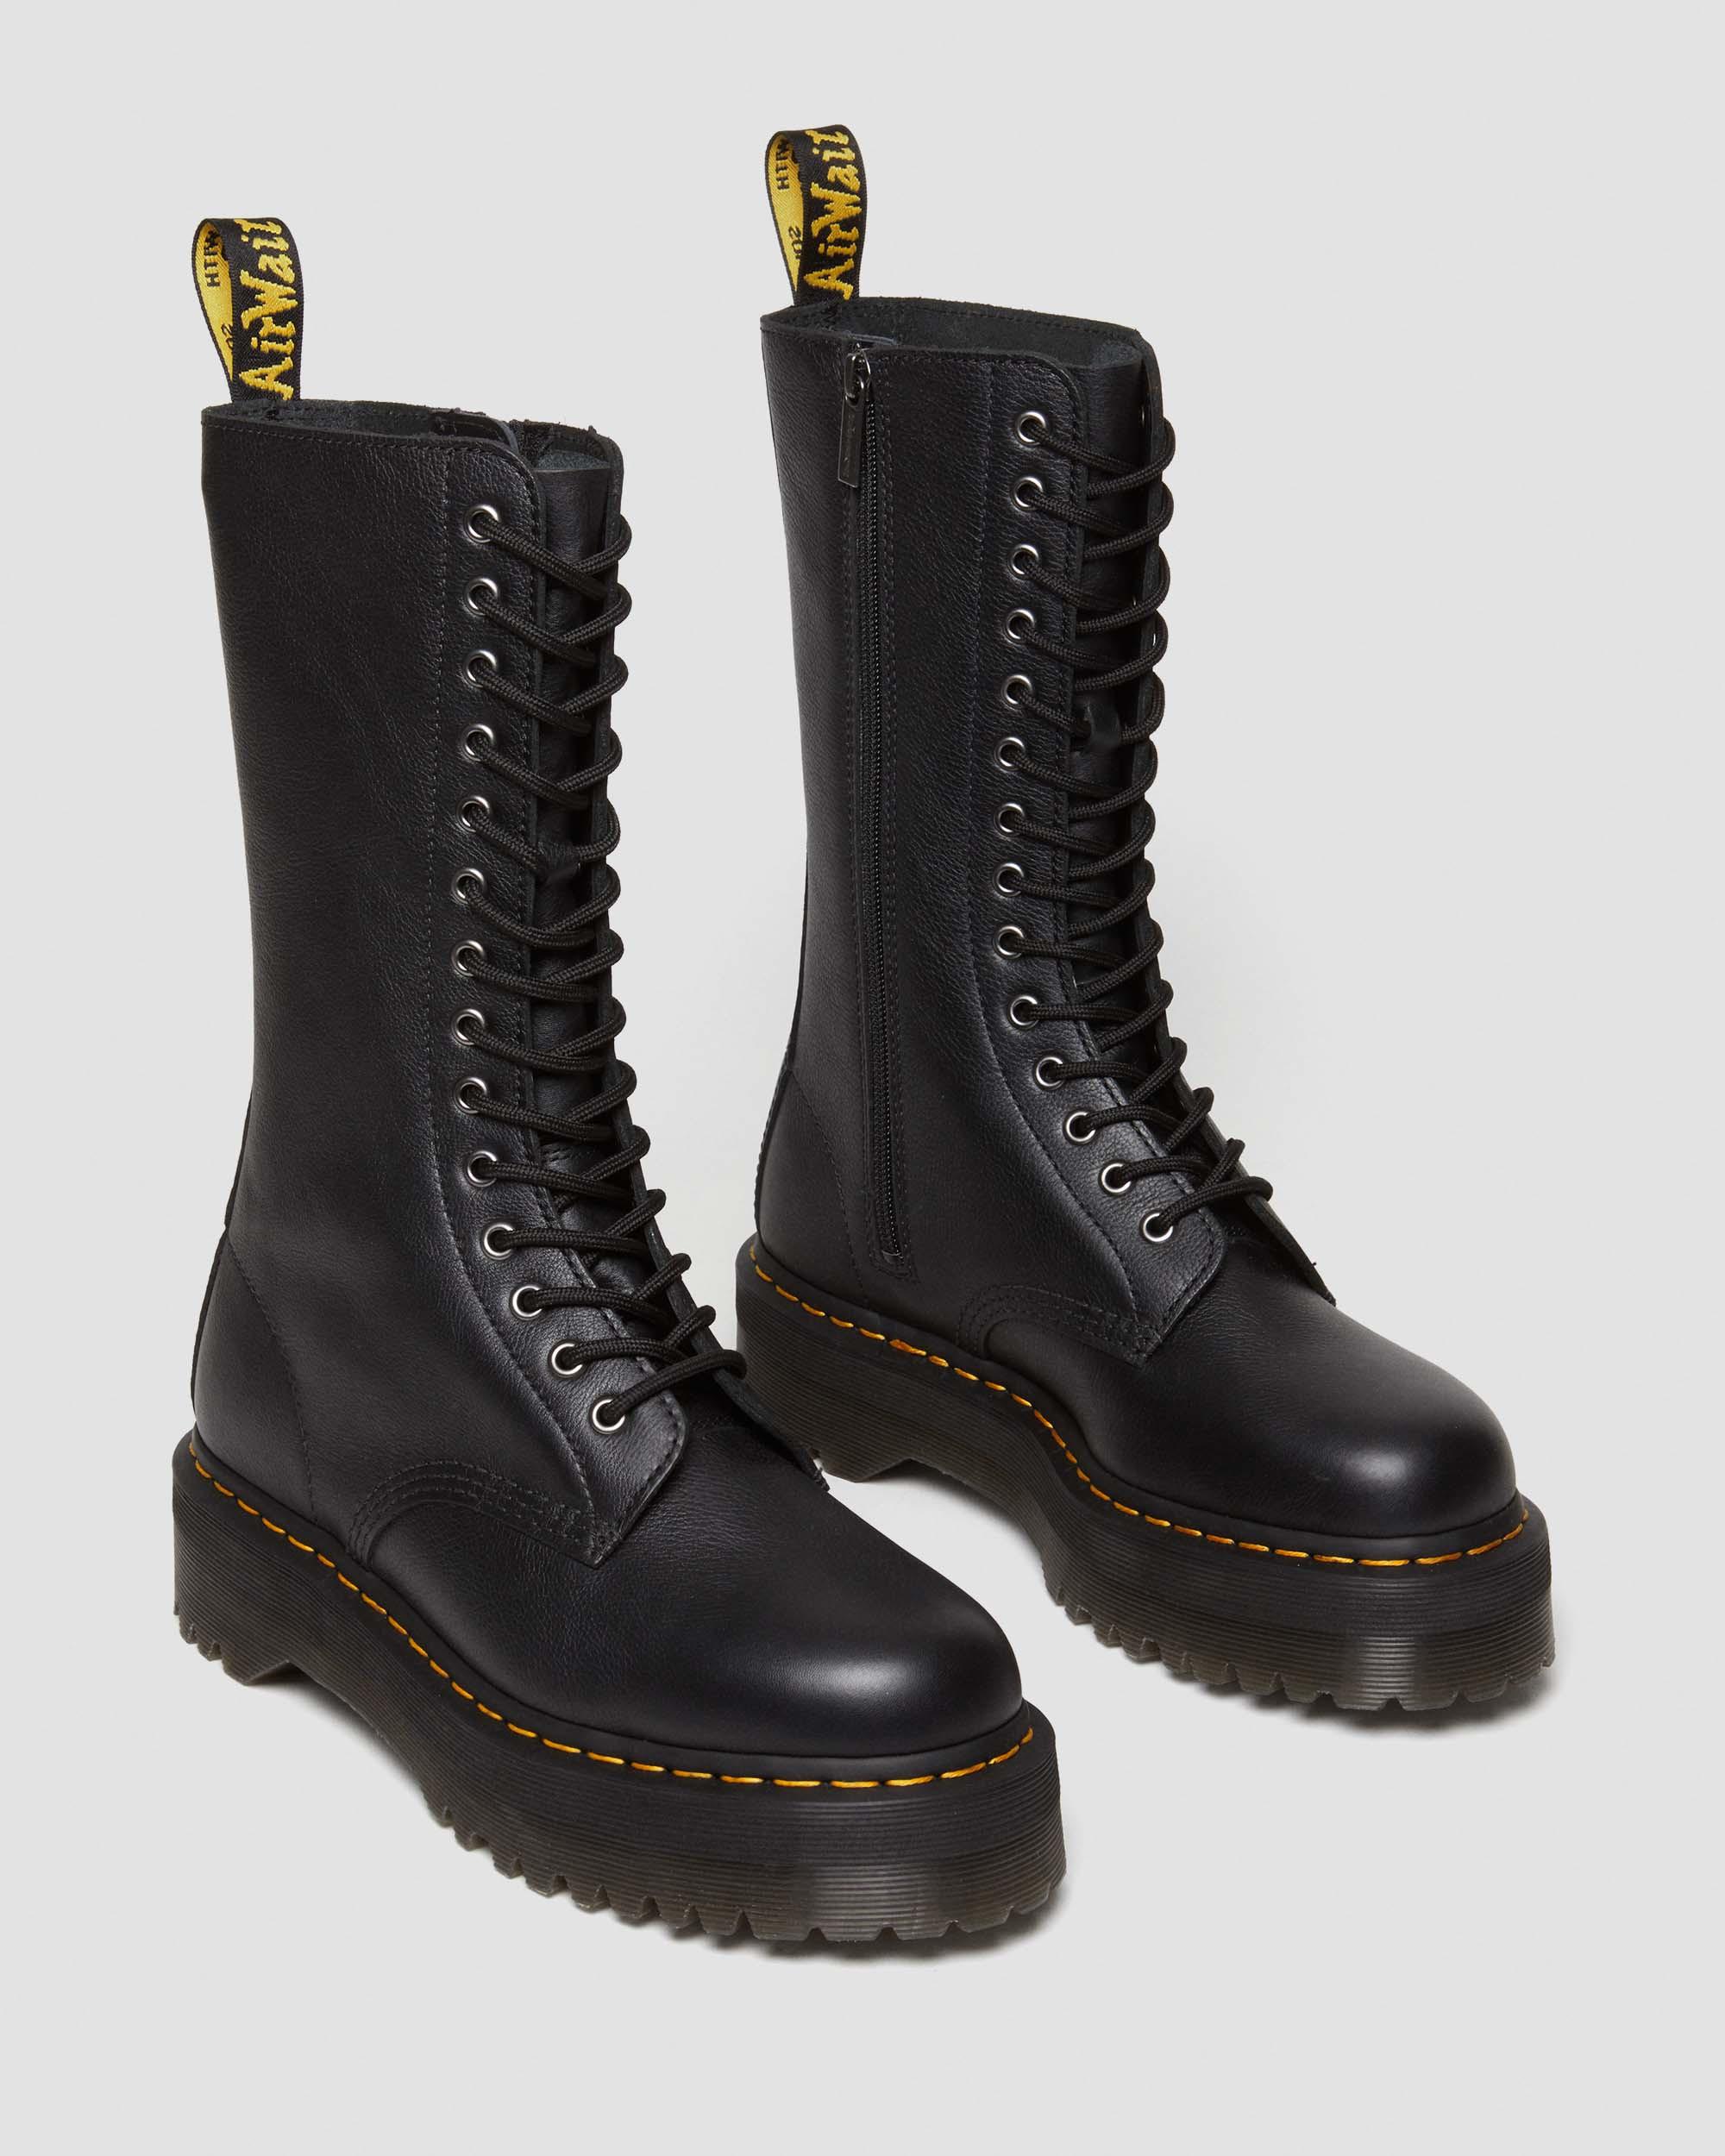 1B99 Pisa Leather Mid Calf Lace Up Boots in Black | Dr. Martens